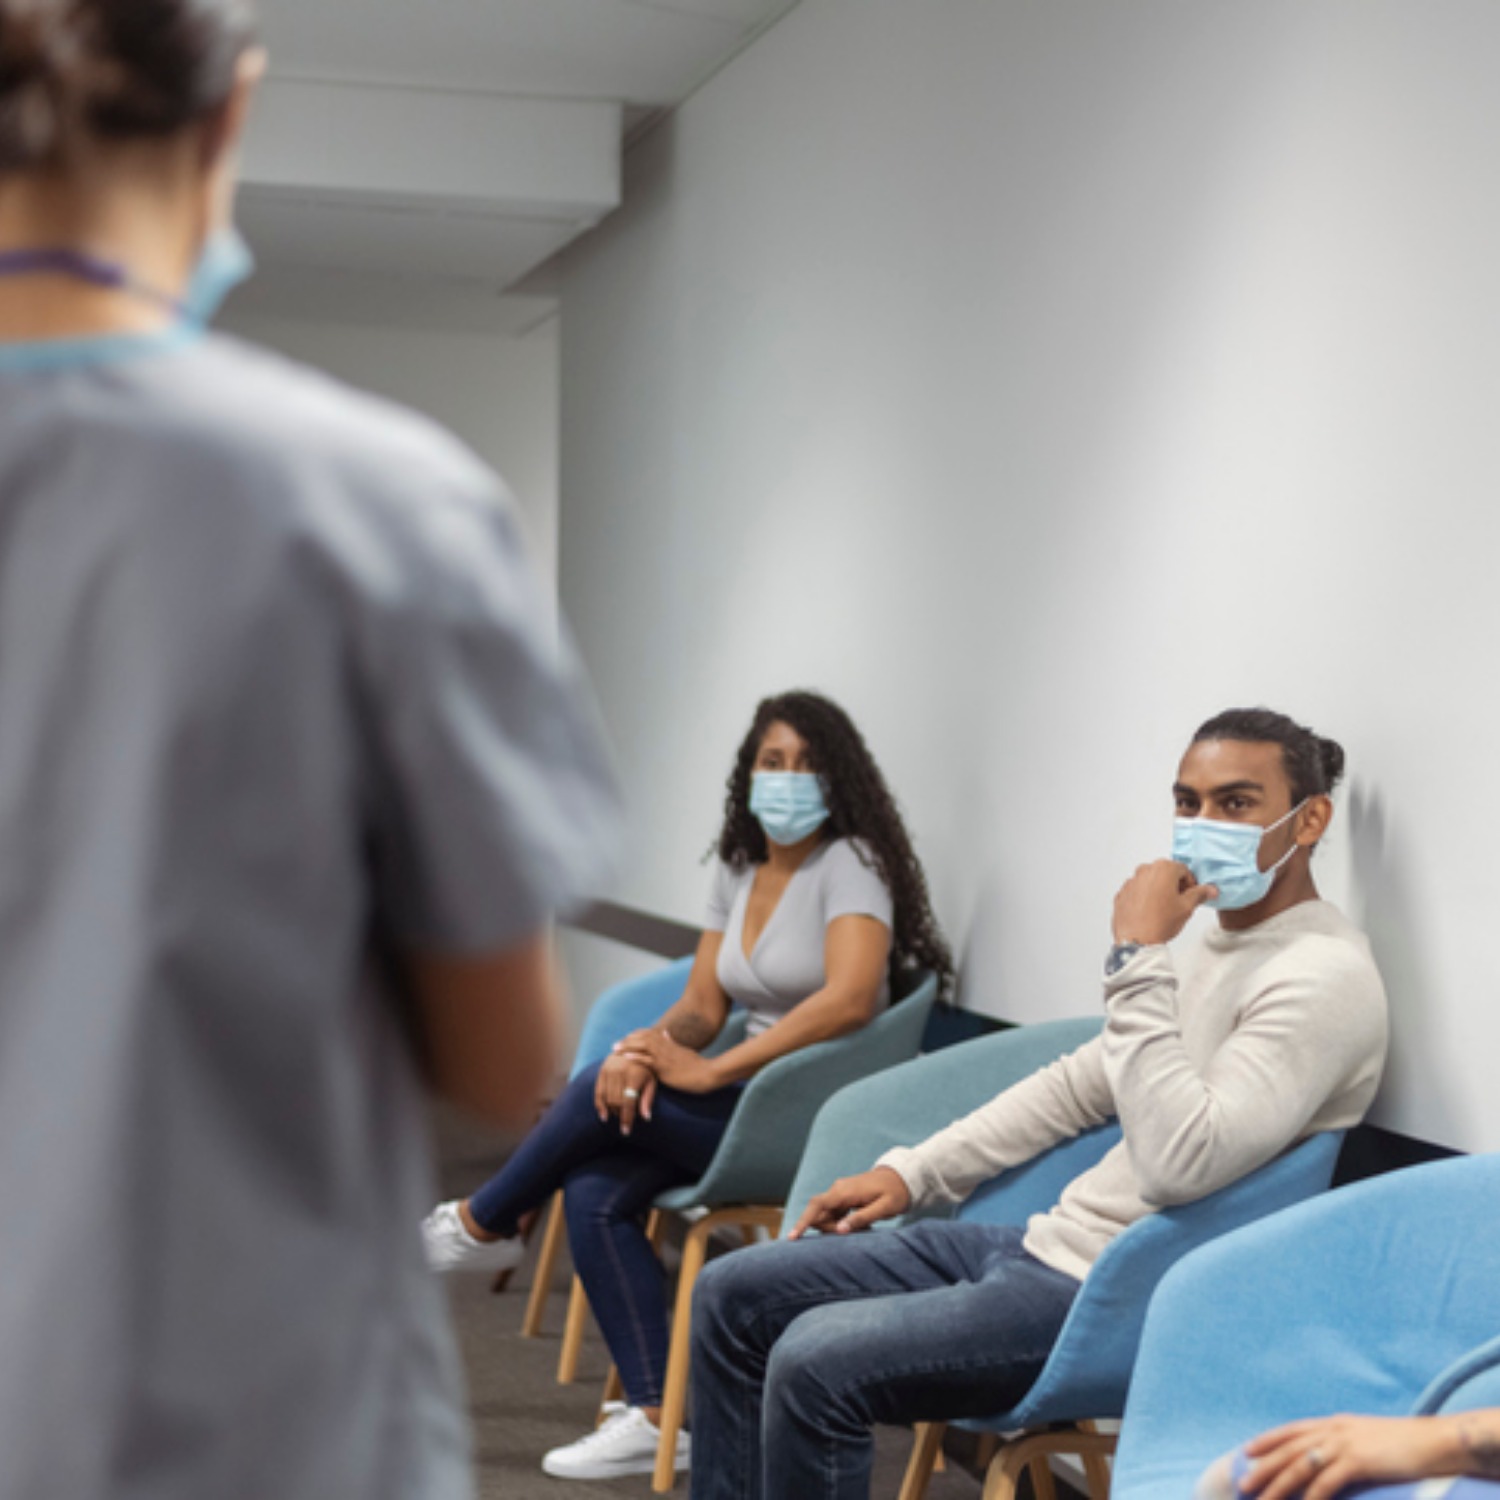 male and female sitting in a hospital waiting room wearing face masks^empty:{ds__assetid^as_asset:asset_name}